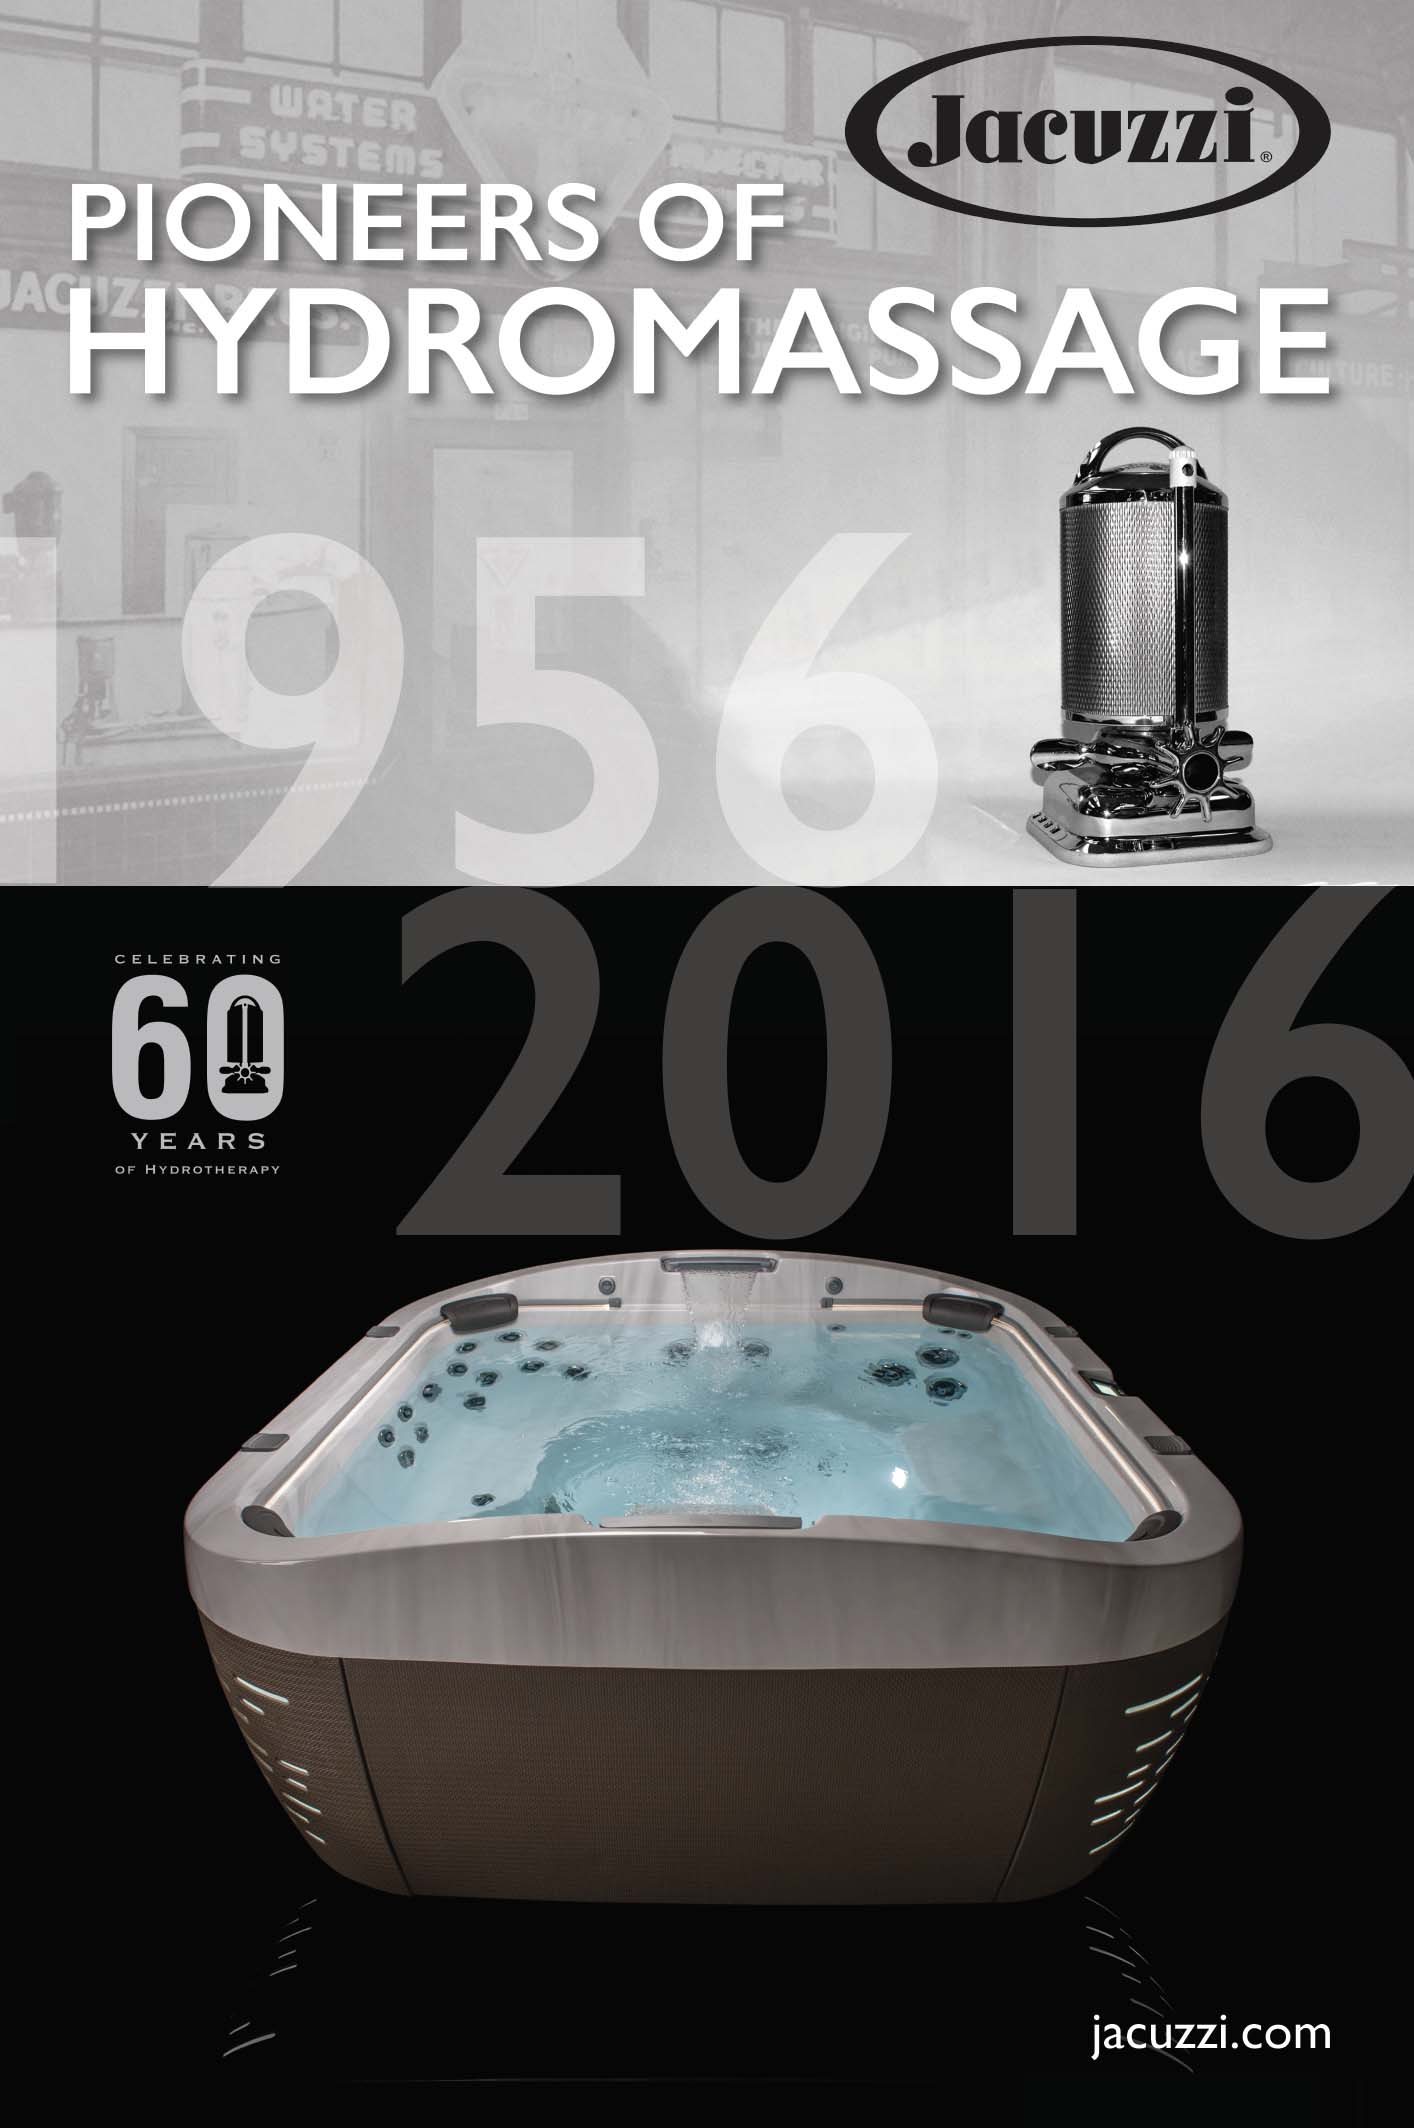 jacuzzi-hot-tubs-celebrates-60-year-anniversary-with-historic-promotion